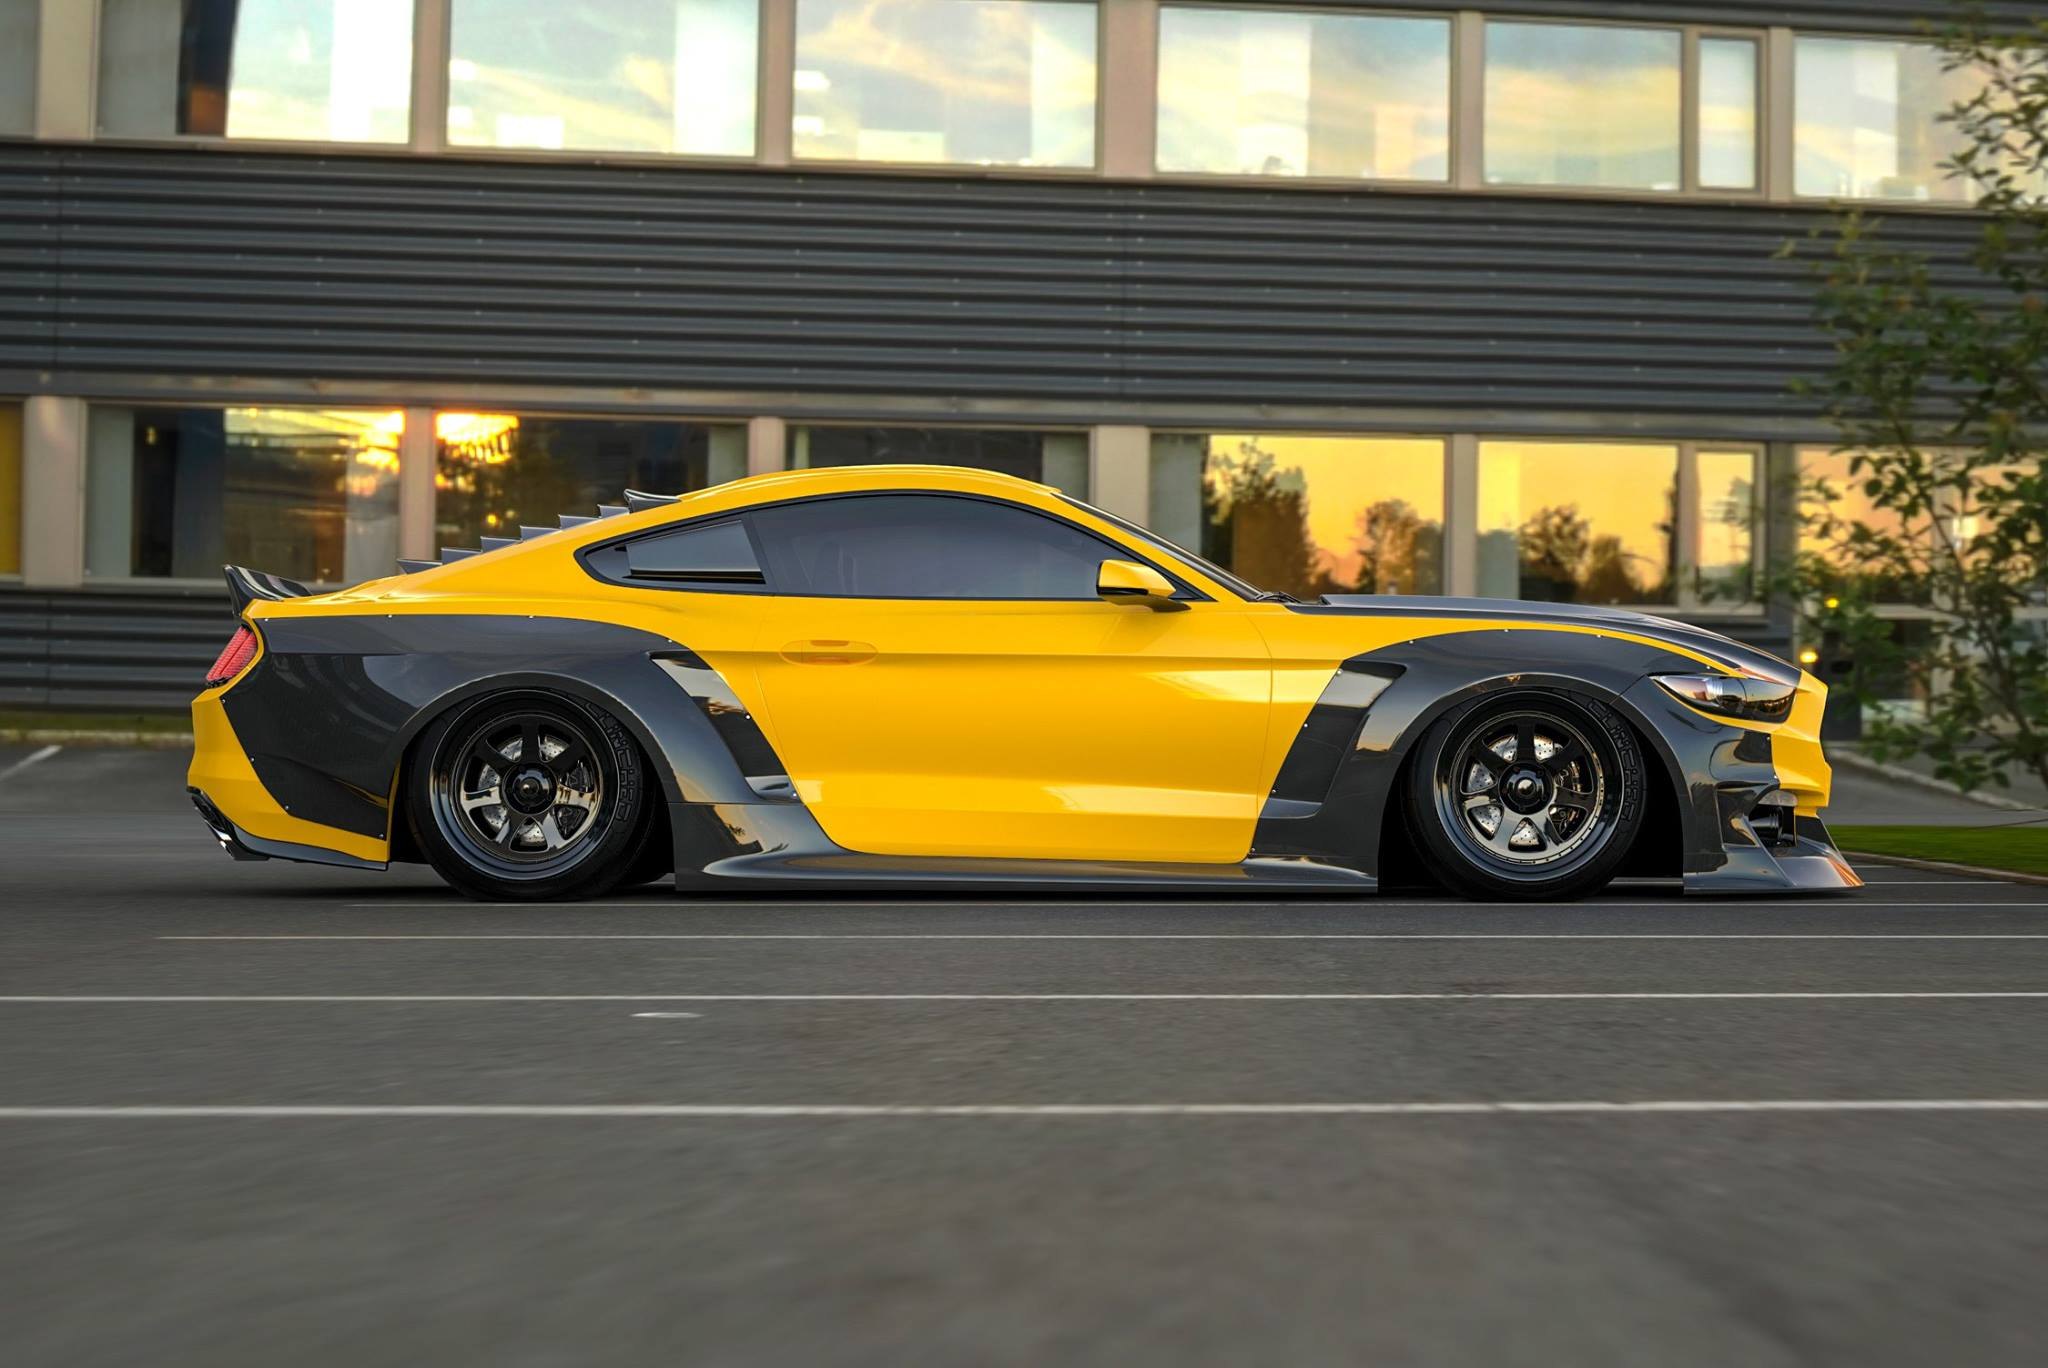 Carbon Fiber Side Skirts on Yellow Ford Mustang - Photo by Clinched